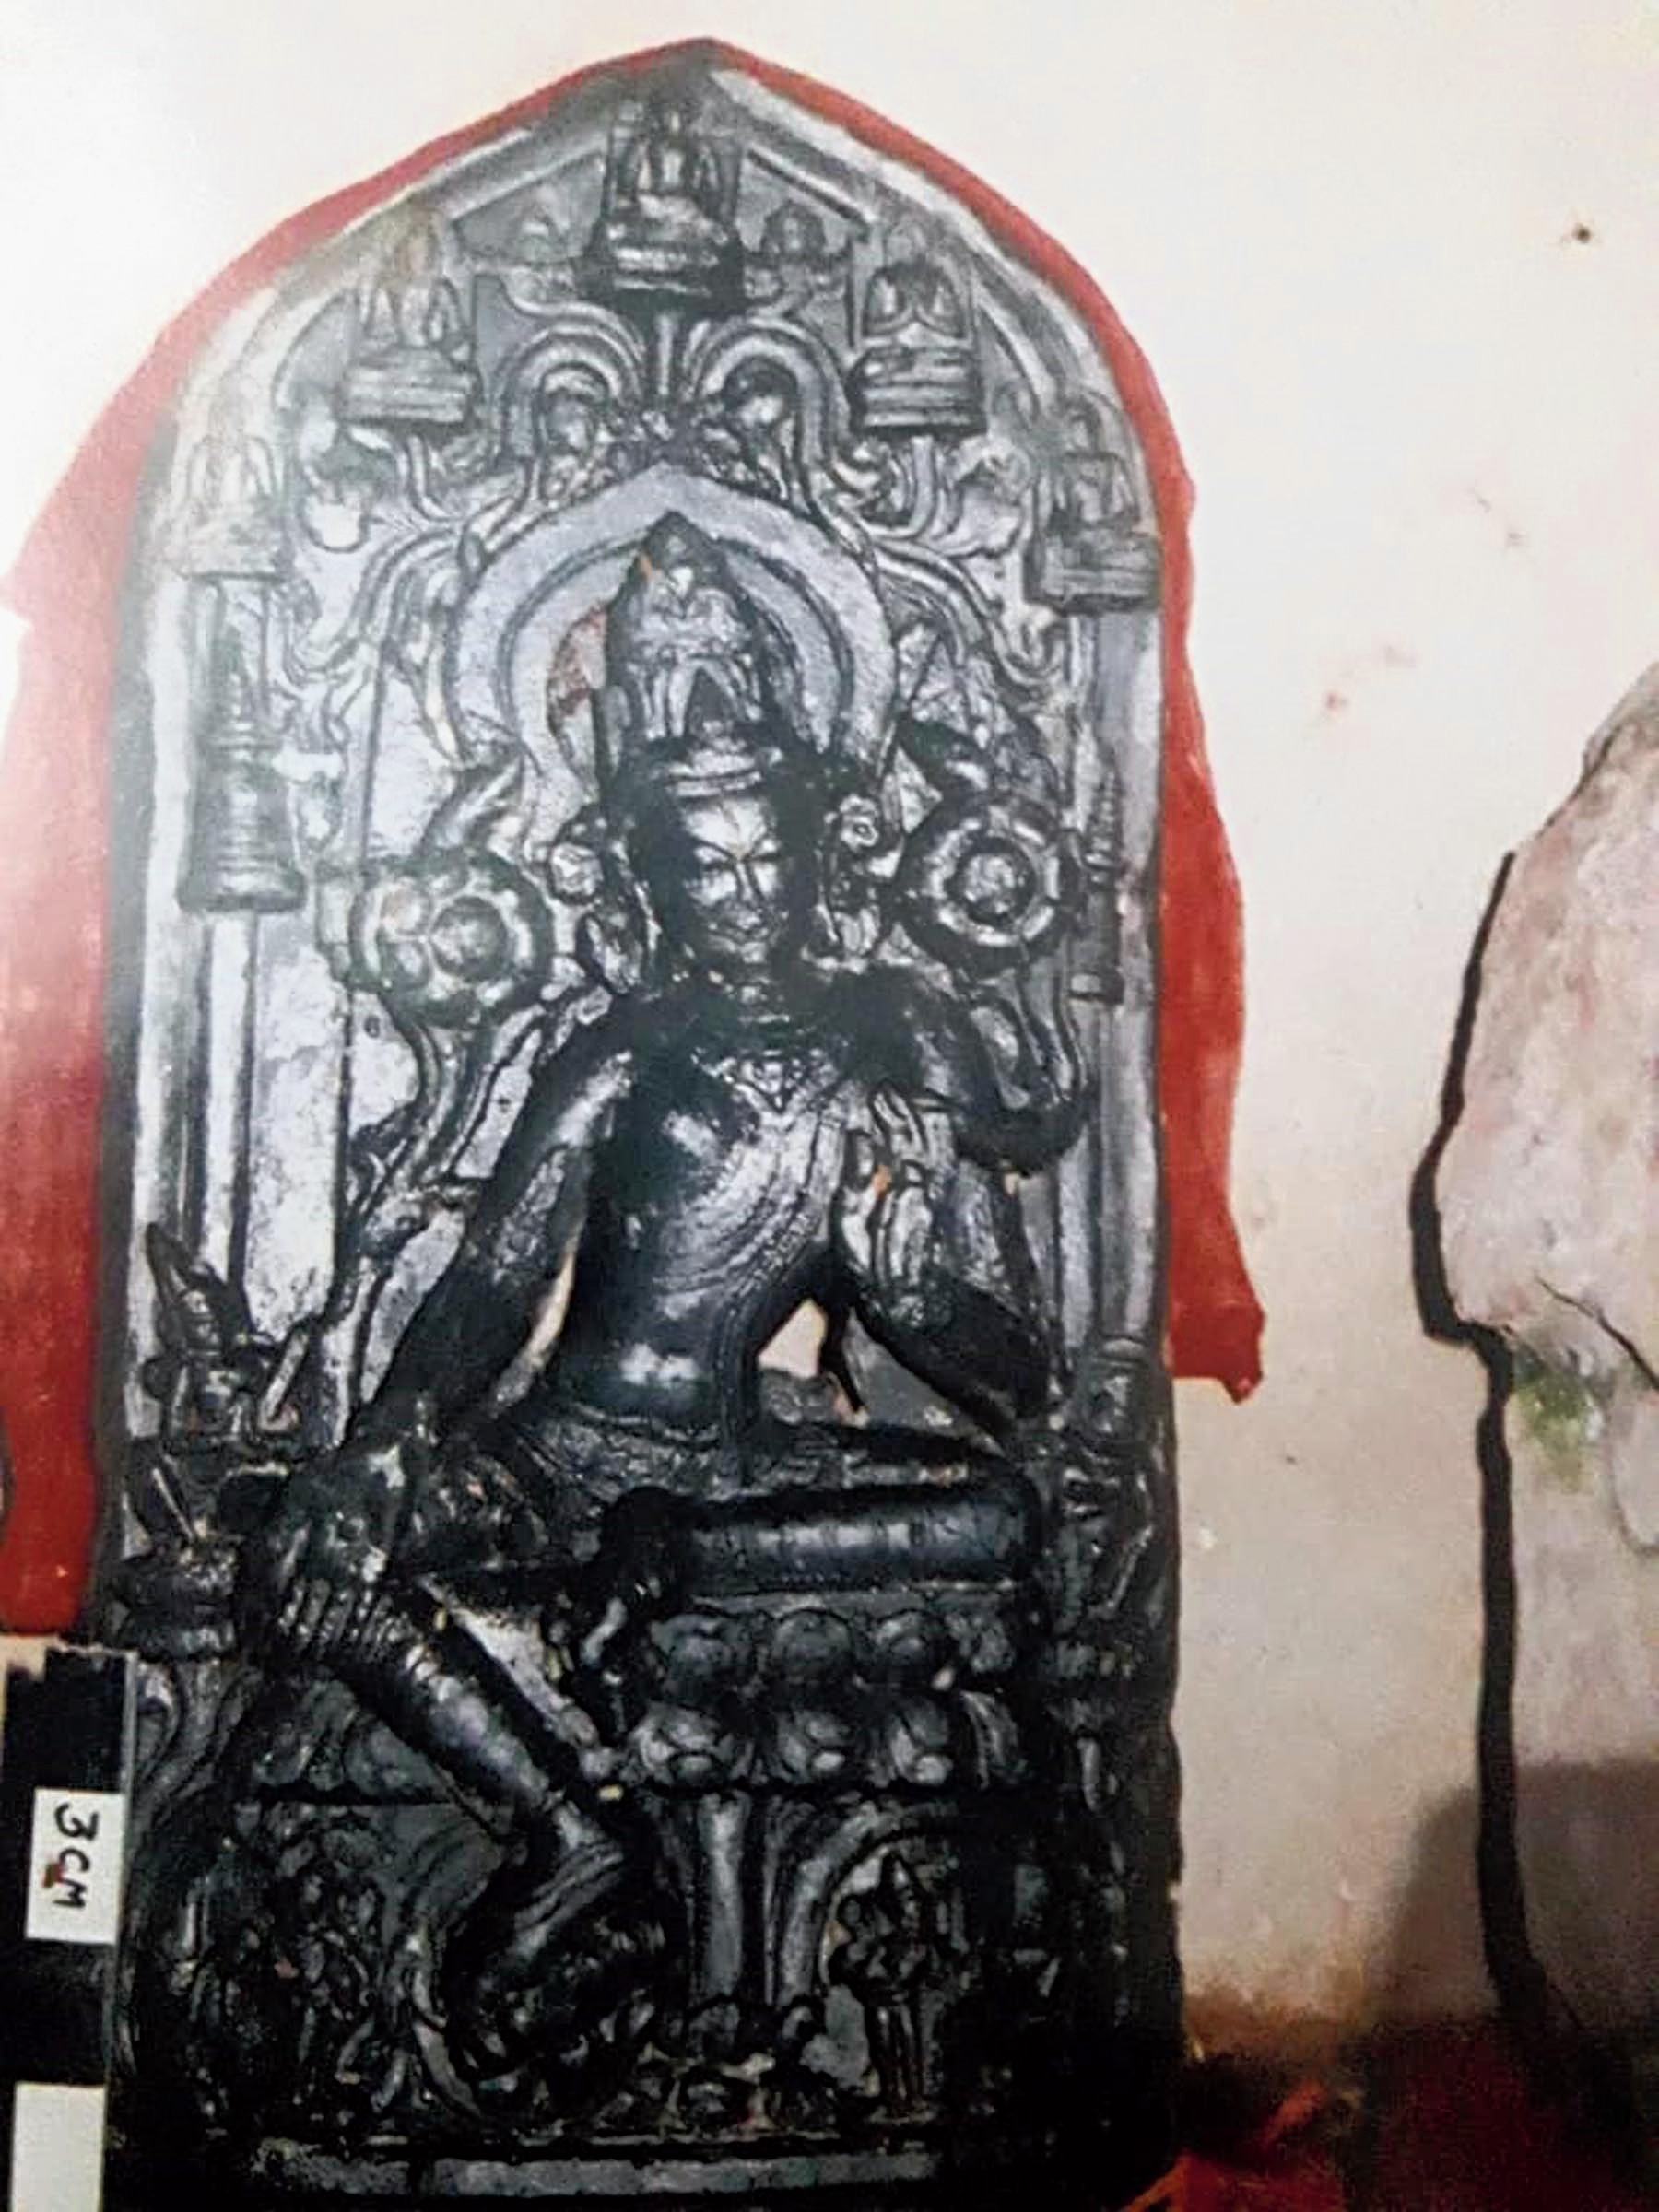 The idol that was stolen from Birpur in Begusarai.